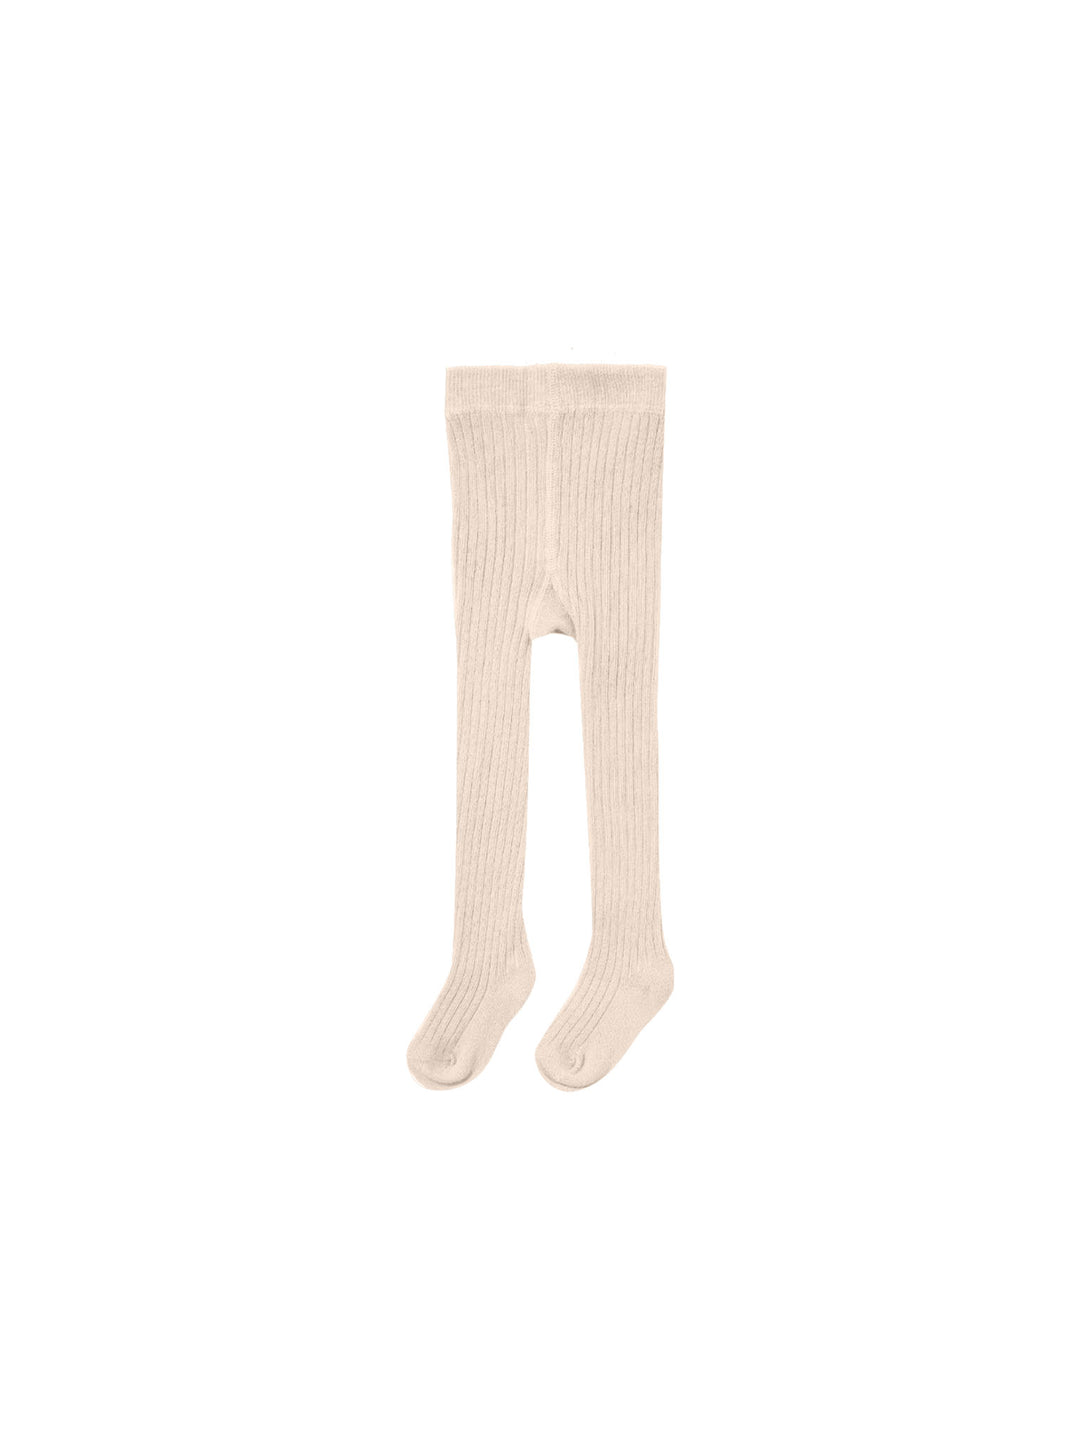 Quincy Mae Solid Tights, Shell |Mockingbird Baby & Kids